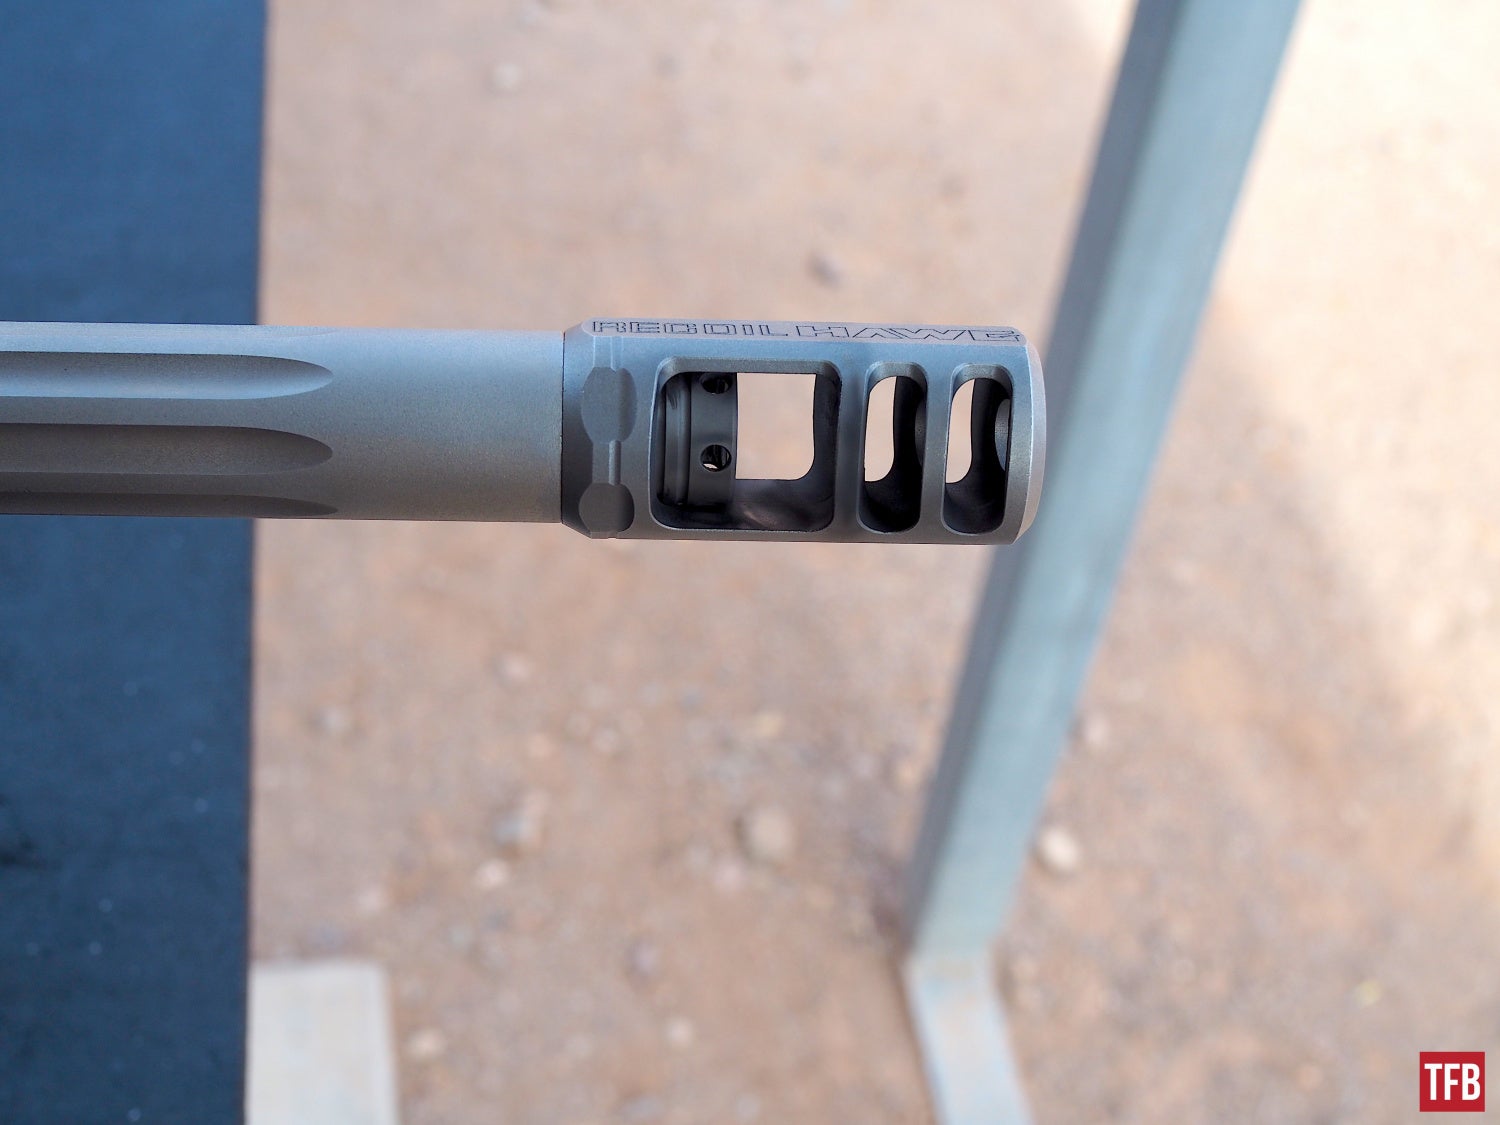 Browning's easy-indexing muzzle brake